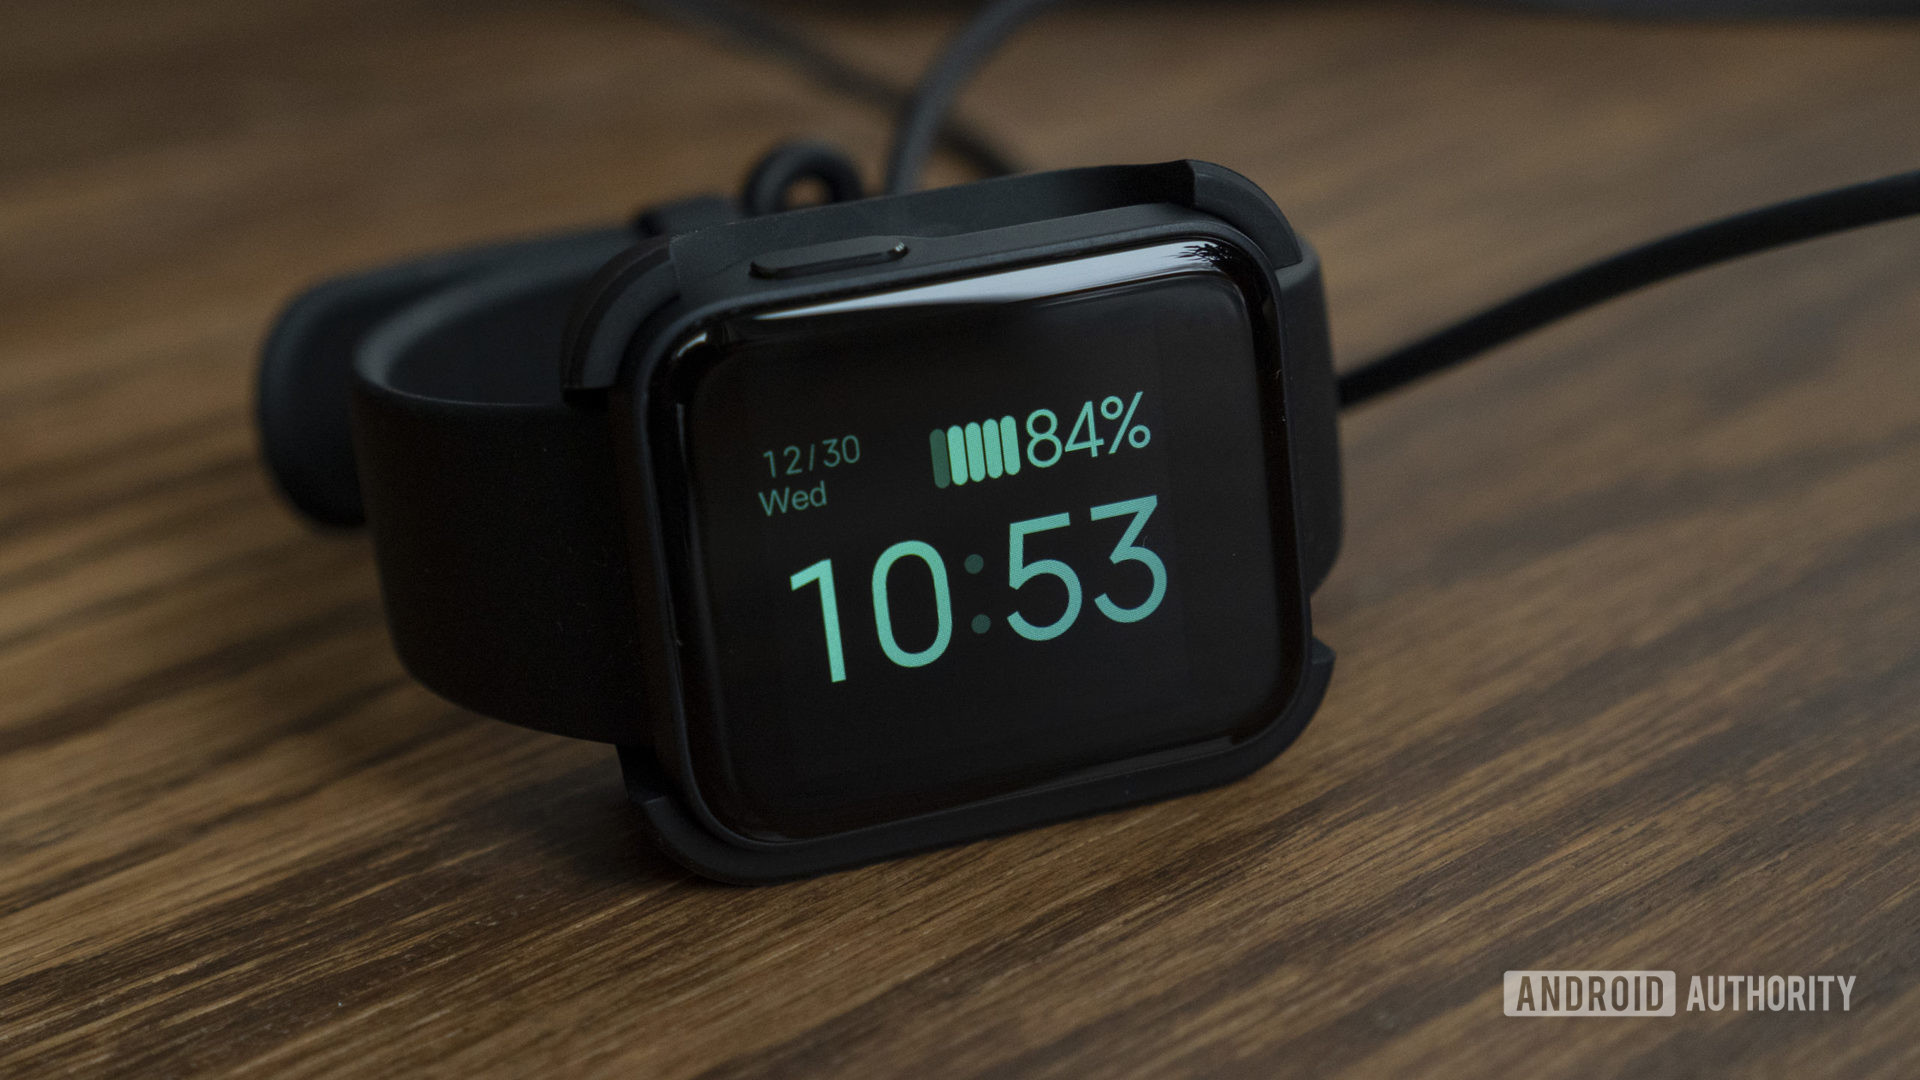 Smartwatch life: it's not longer and it should be